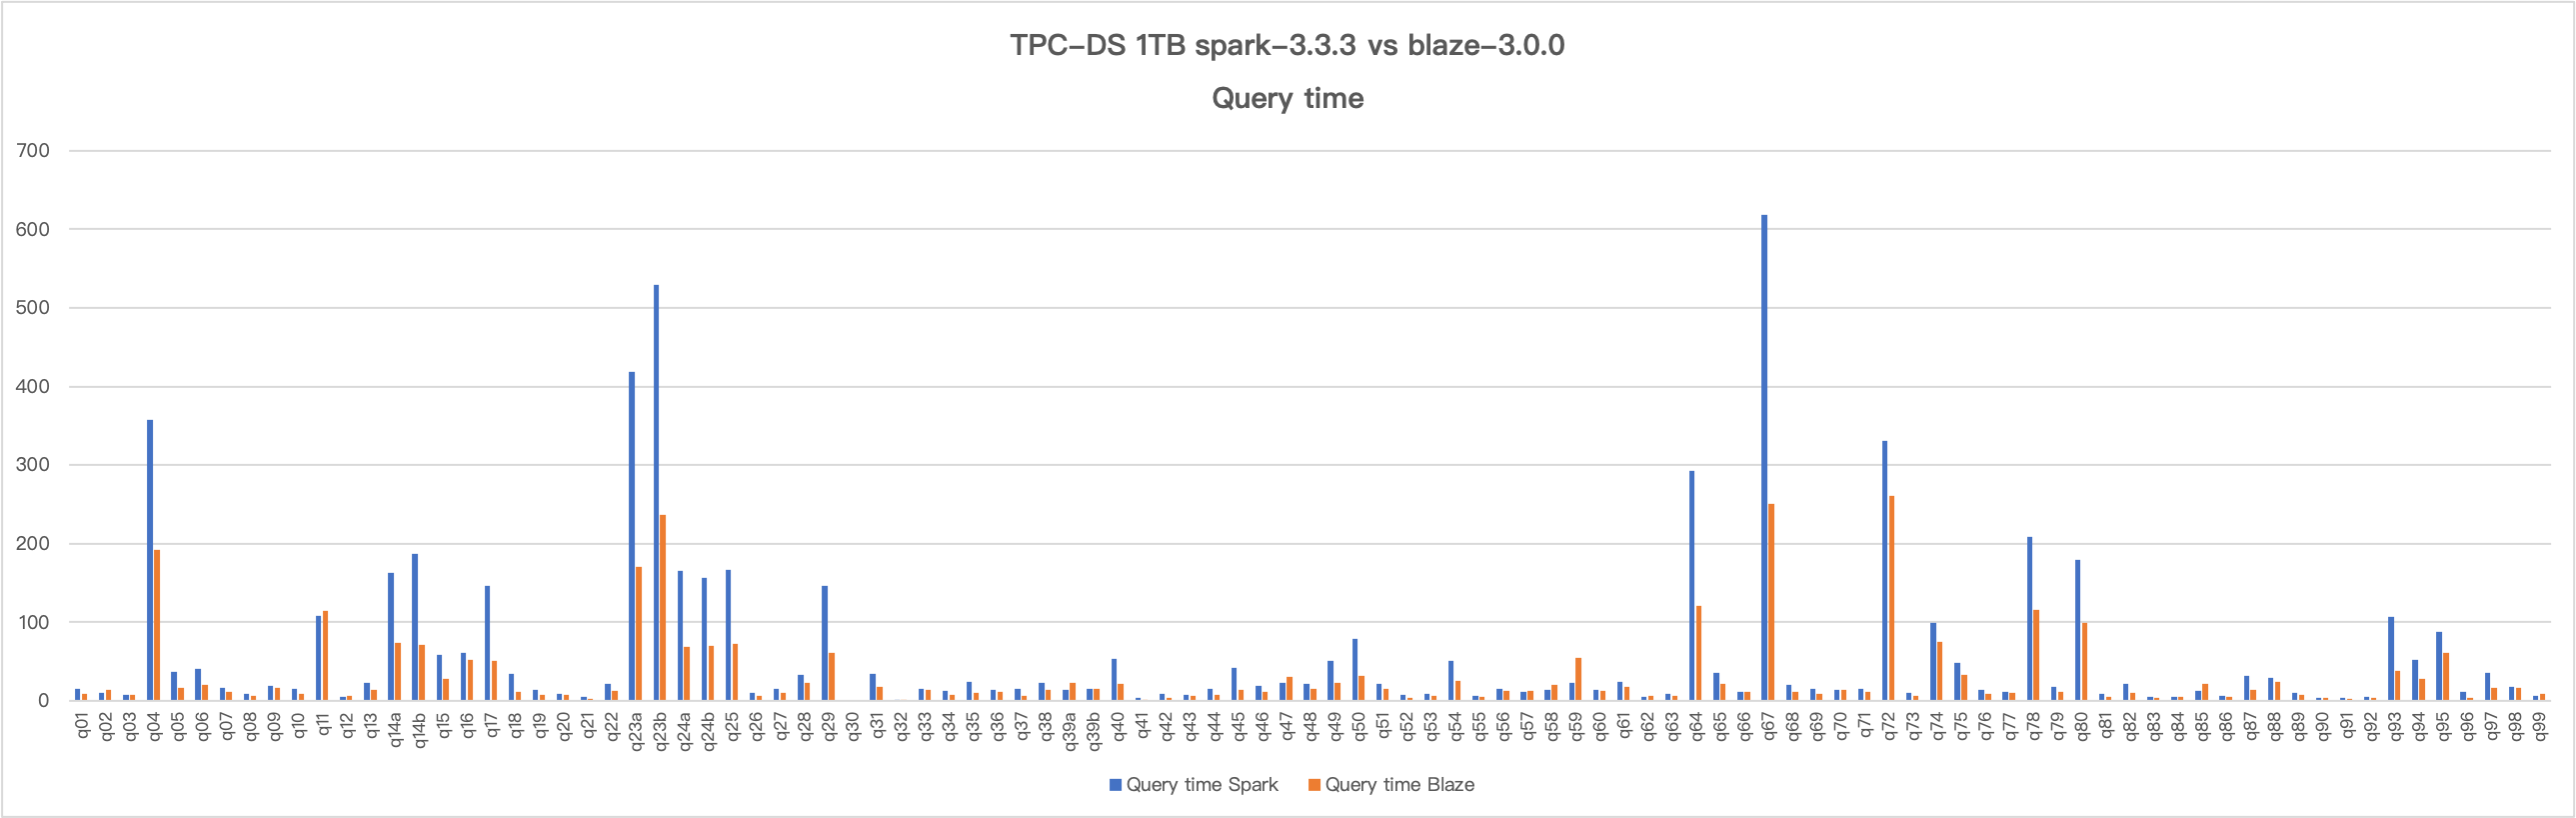 20240701-query-time-tpcds